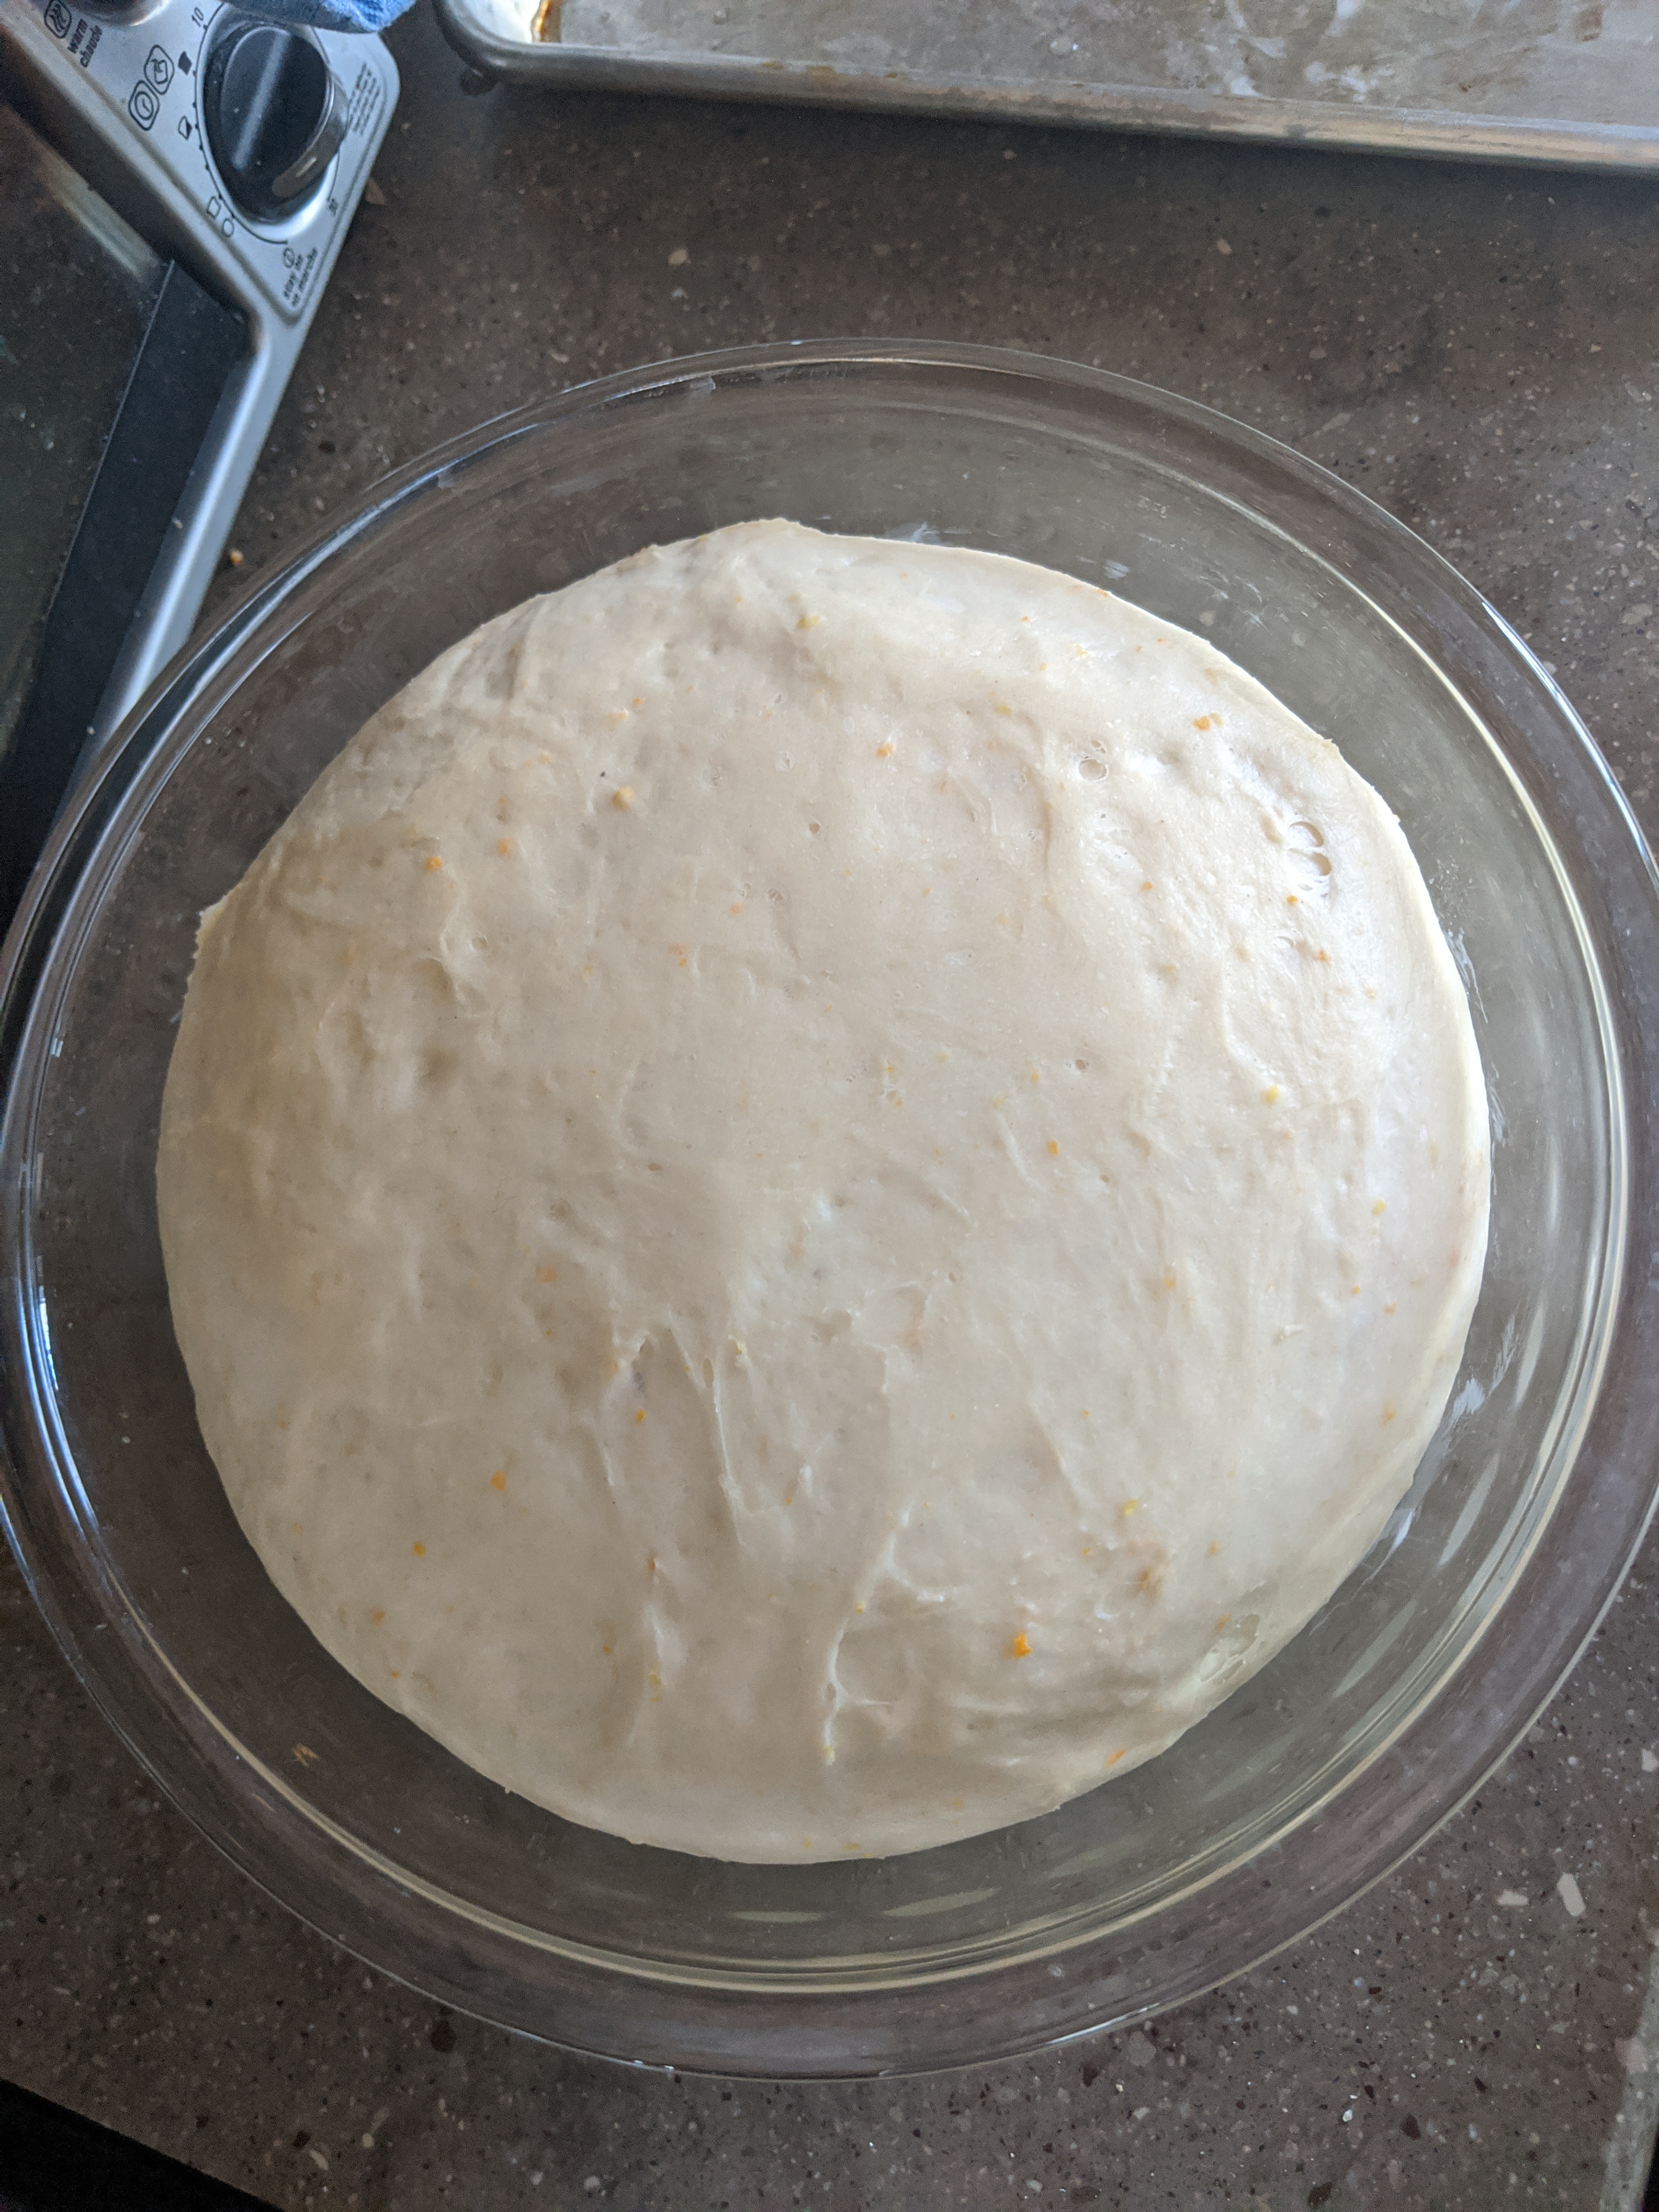 A large bowl of uncooked, risen dough